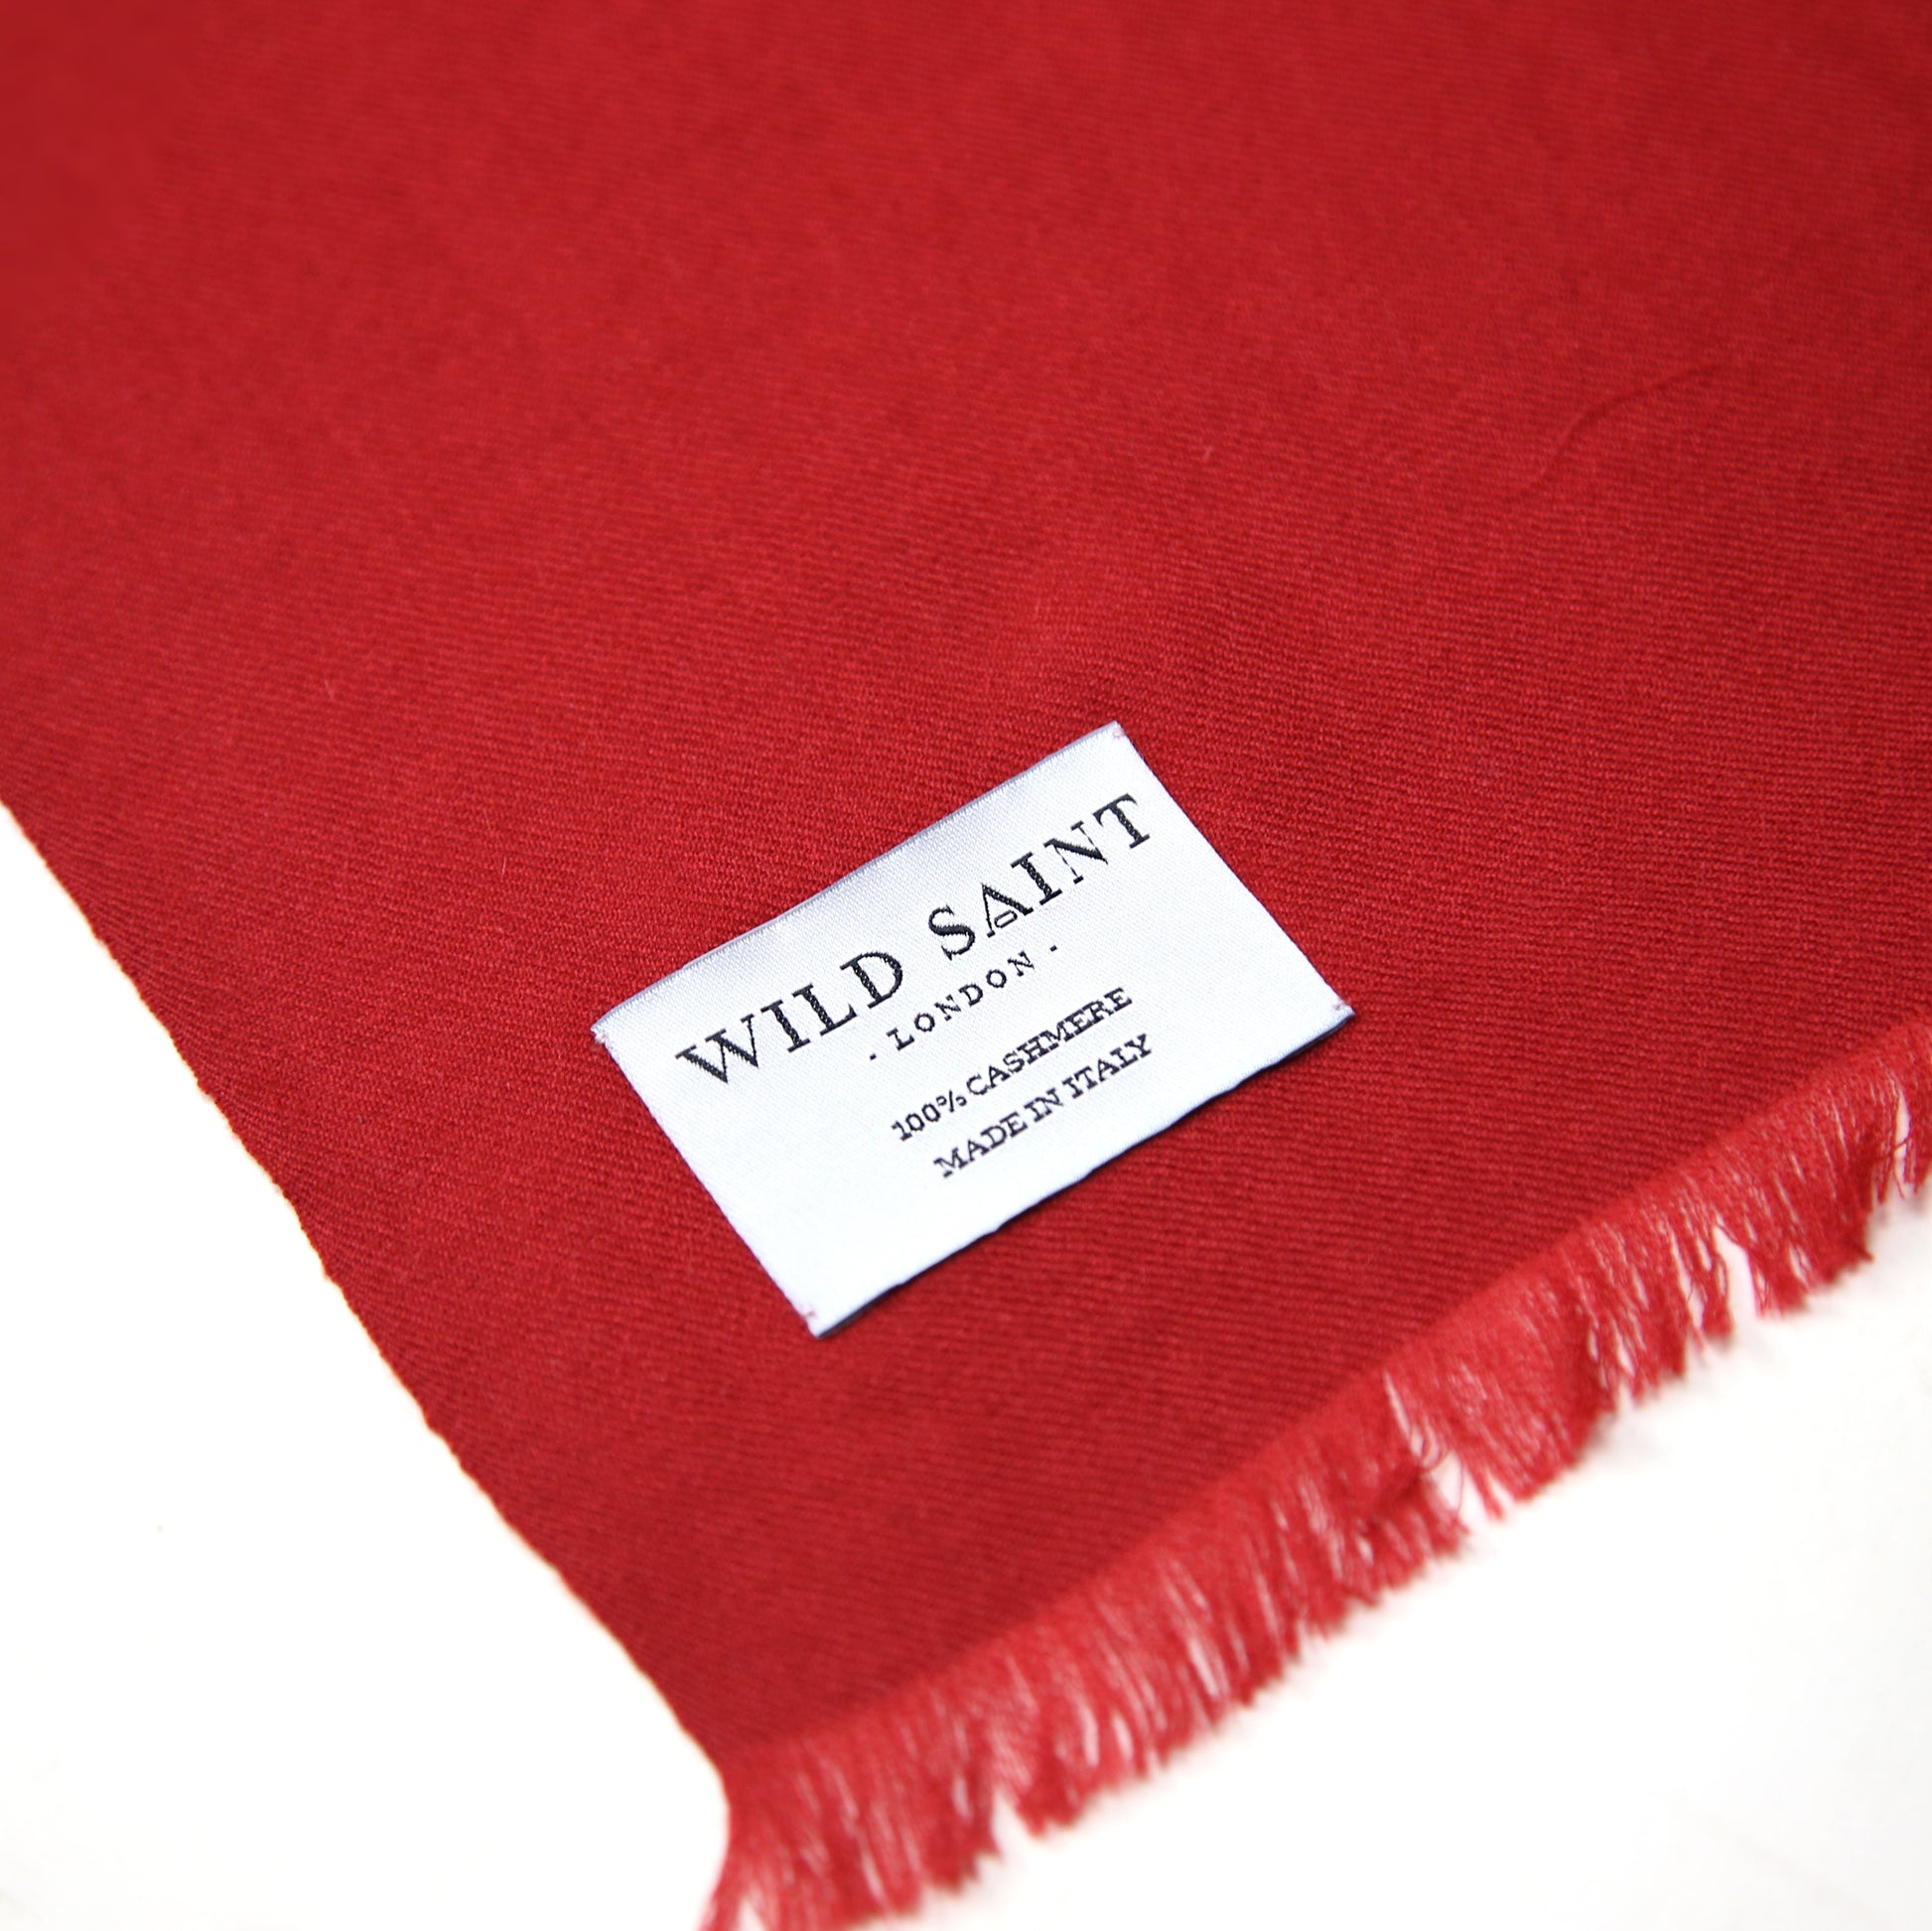 Berry red lightweight 100% cashmere scarf for women and men. Includes complimentary personlisation. Luxury cashmere scarves made in Italy